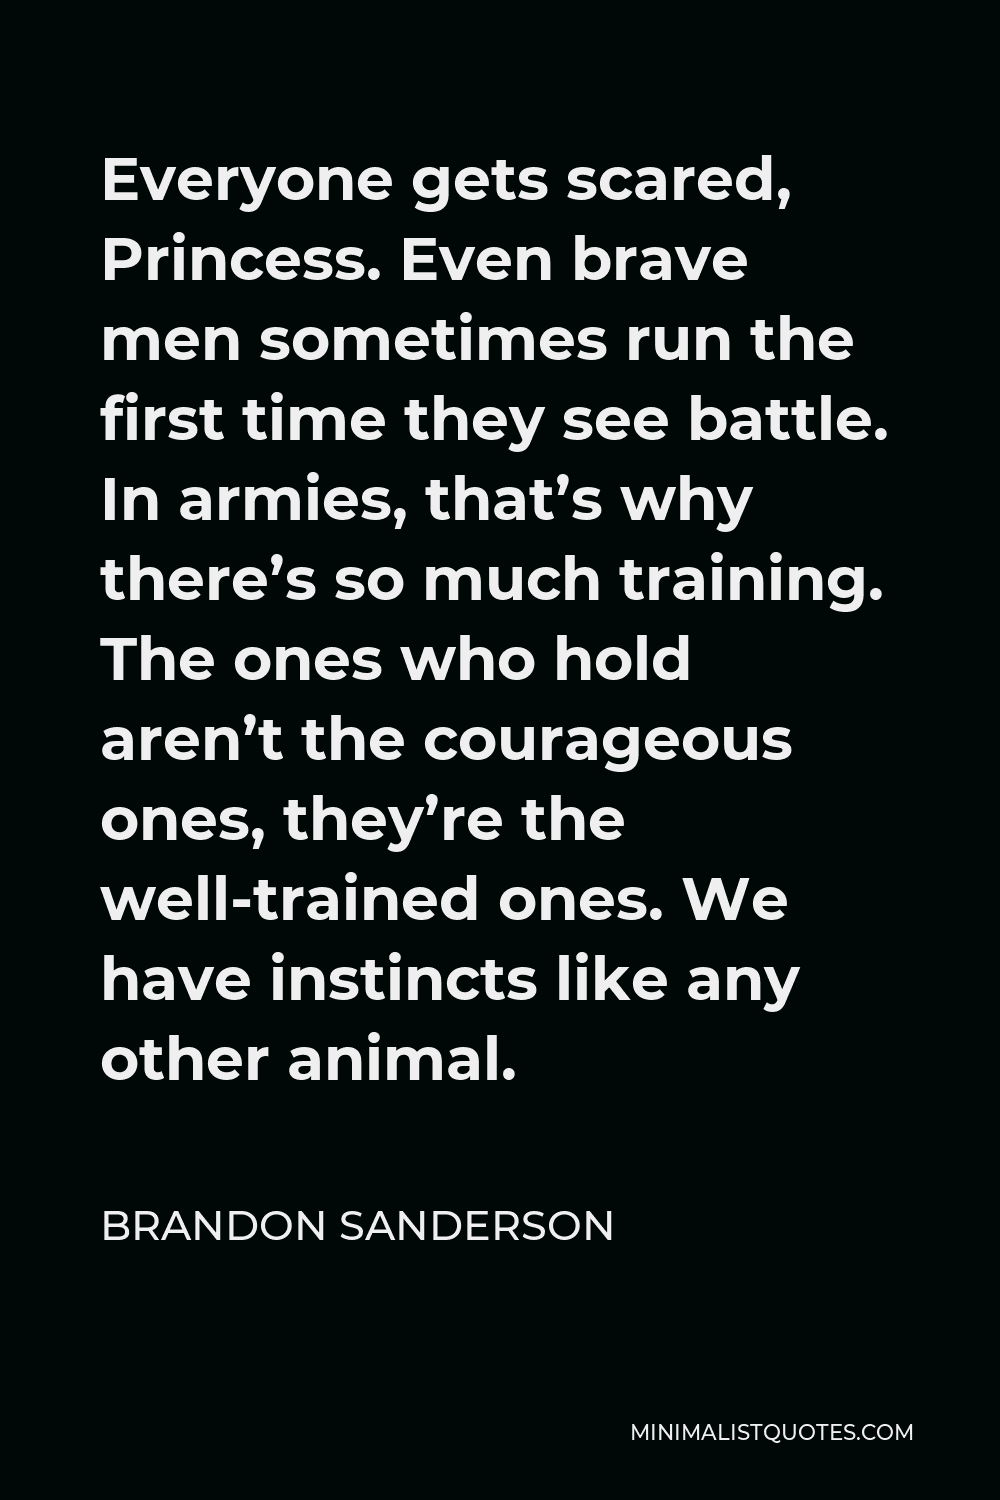 Brandon Sanderson Quote - Everyone gets scared, Princess. Even brave men sometimes run the first time they see battle. In armies, that’s why there’s so much training. The ones who hold aren’t the courageous ones, they’re the well-trained ones. We have instincts like any other animal.